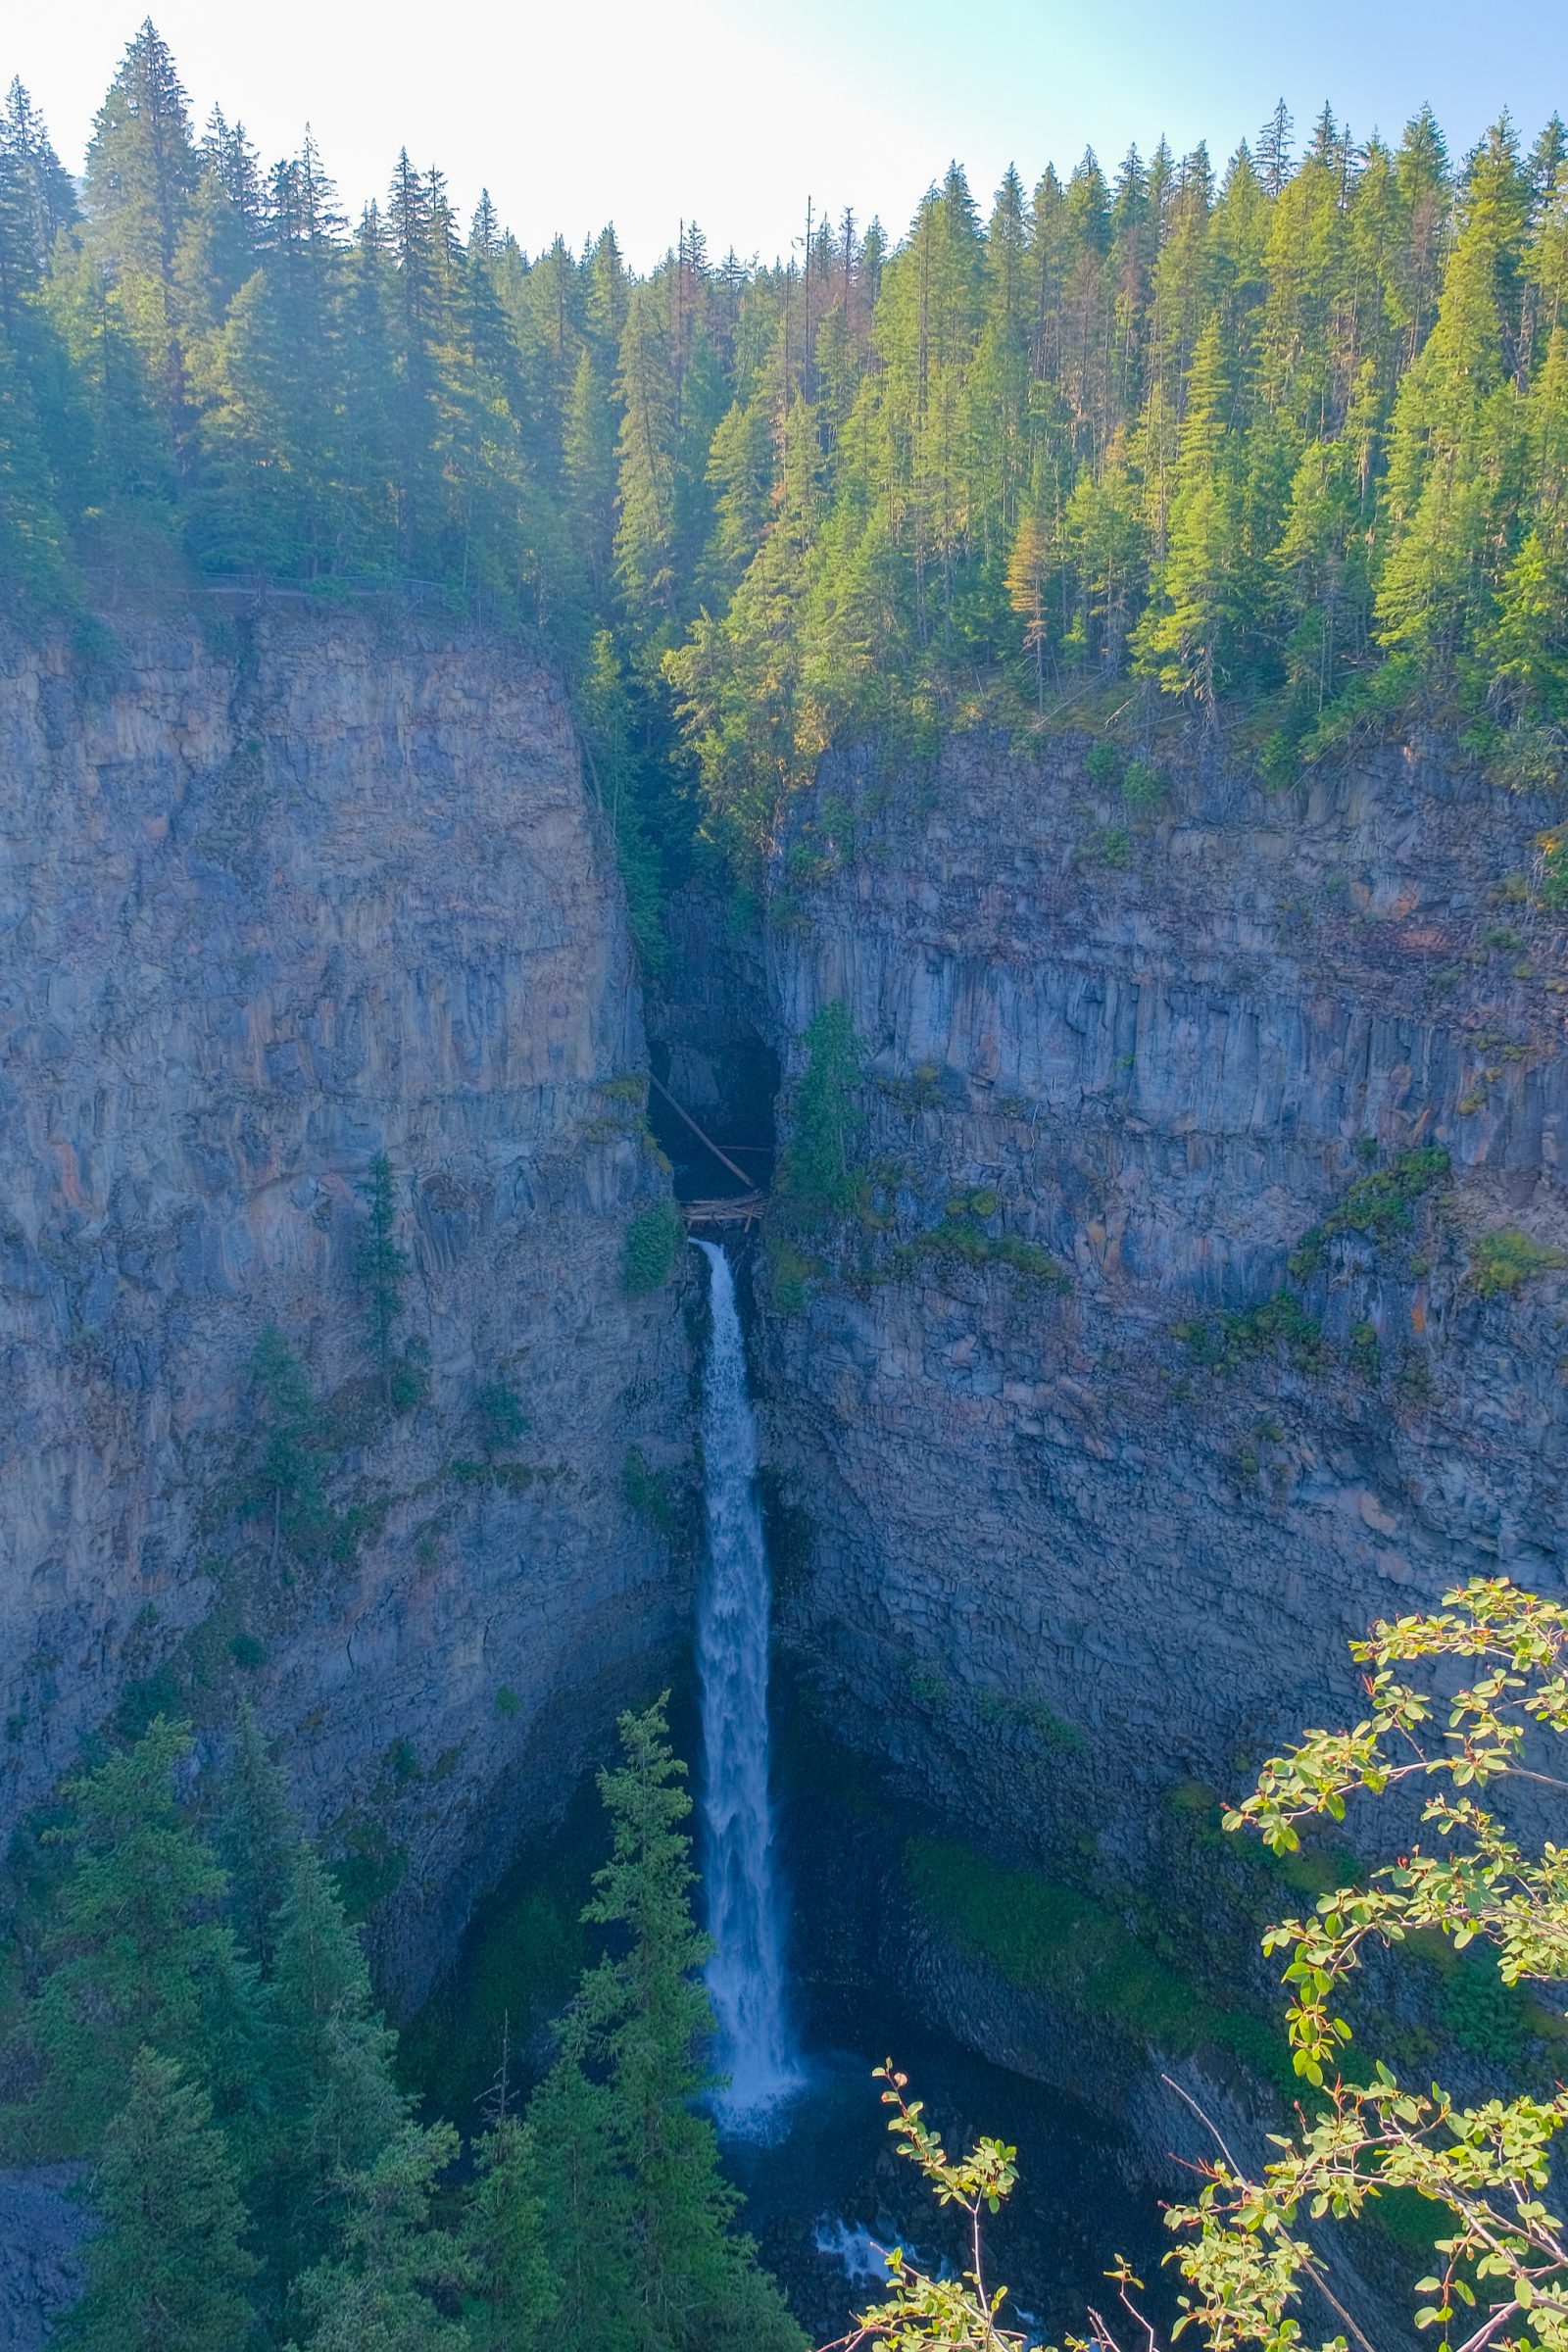 Spahats Falls near Clearwater, Canada